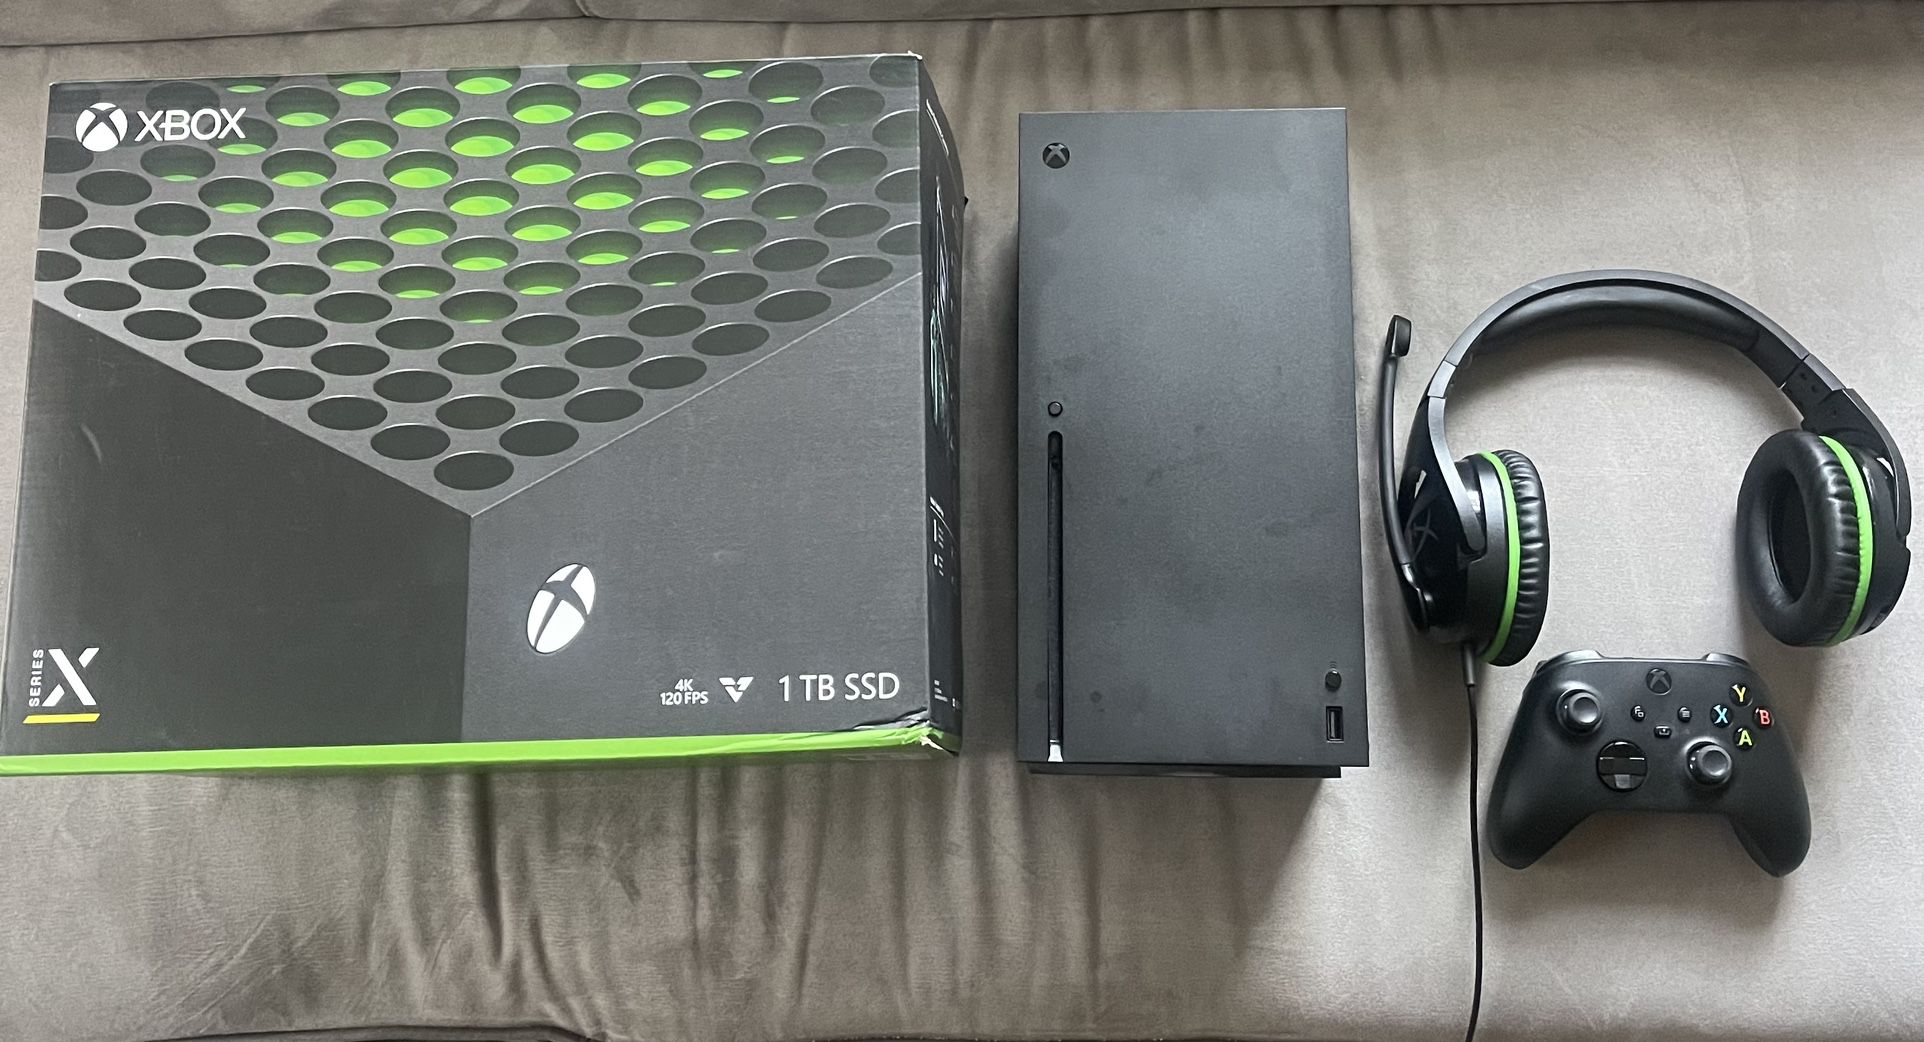 Xbox SeriesX with Controller and HyperX Headset. Will Negotiate Price!